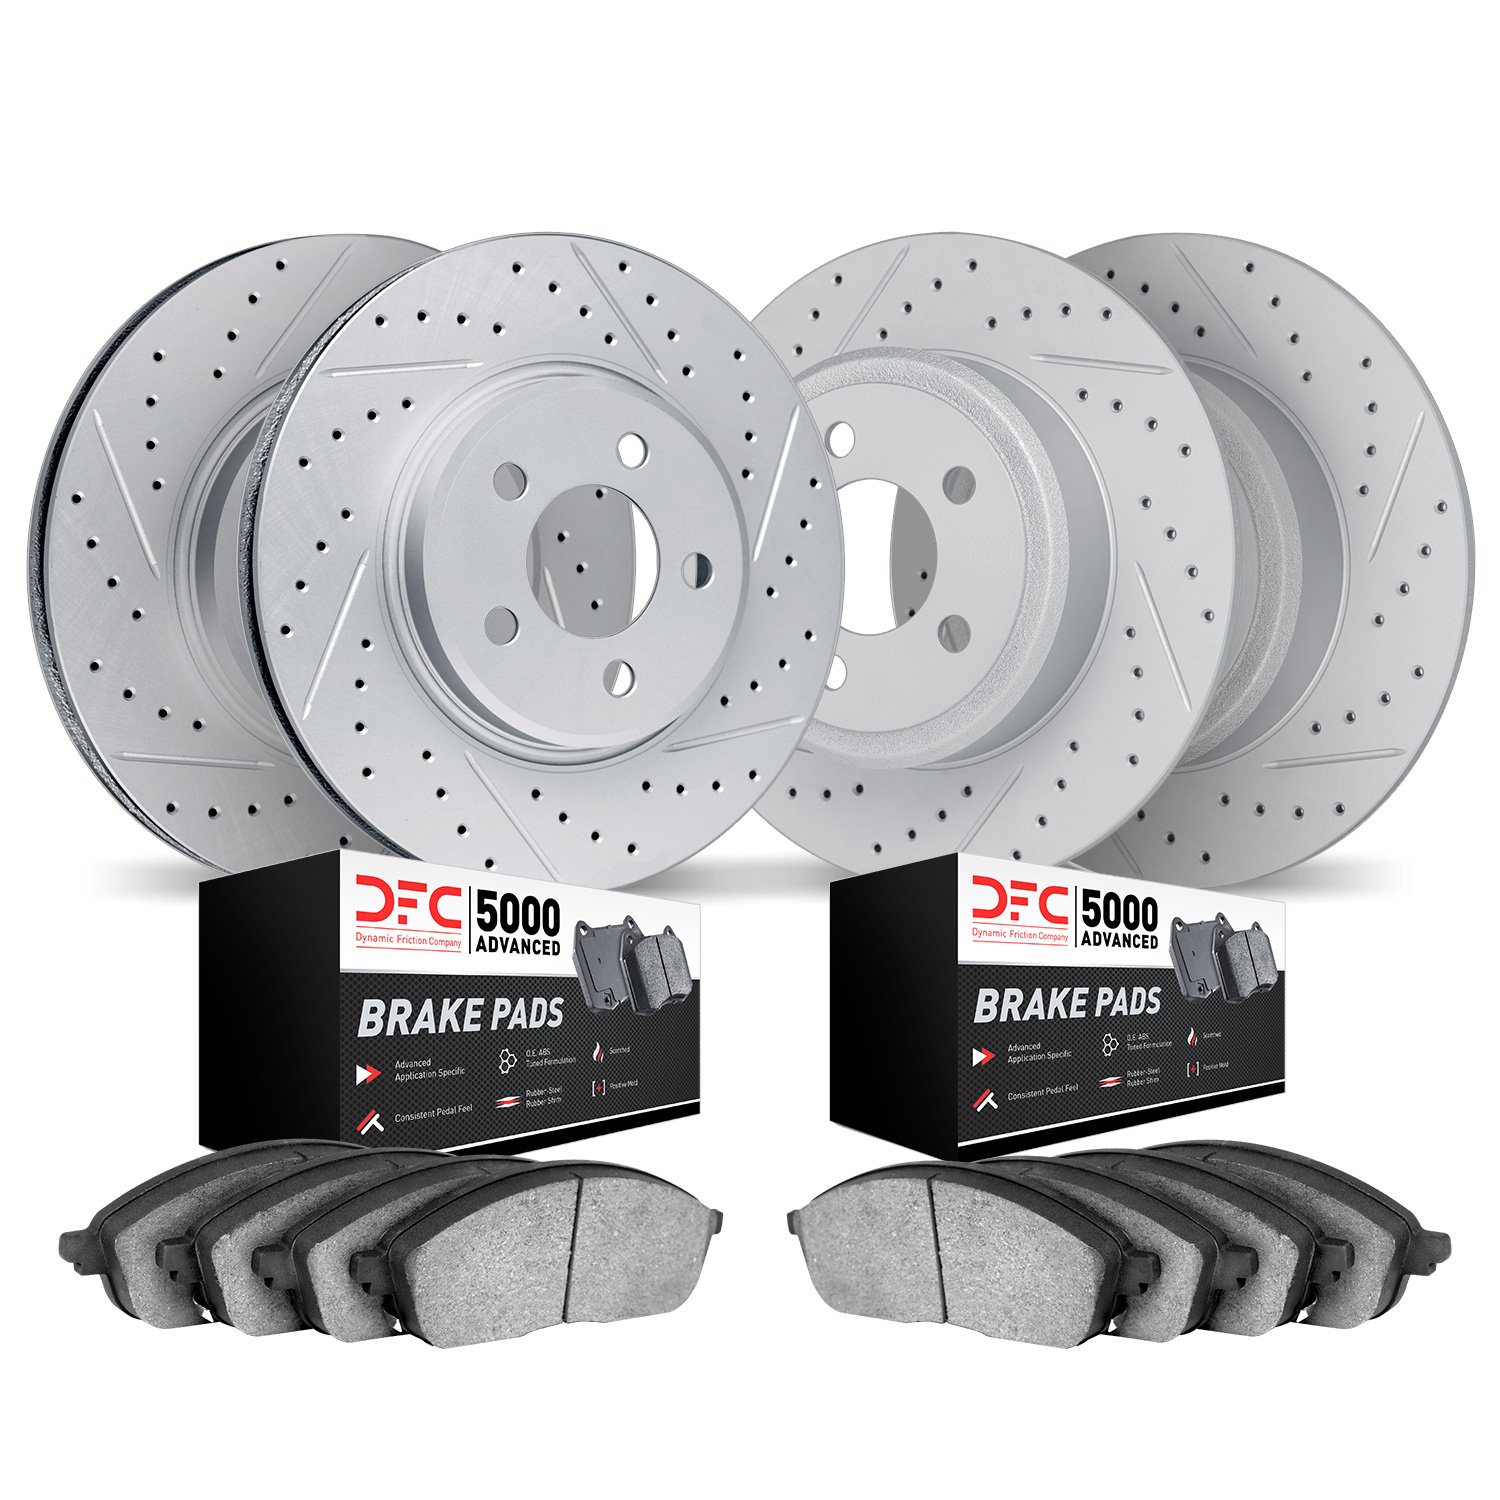 2504-54211 Geoperformance Drilled/Slotted Rotors w/5000 Advanced Brake Pads Kit, 2013-2020 Ford/Lincoln/Mercury/Mazda, Position: